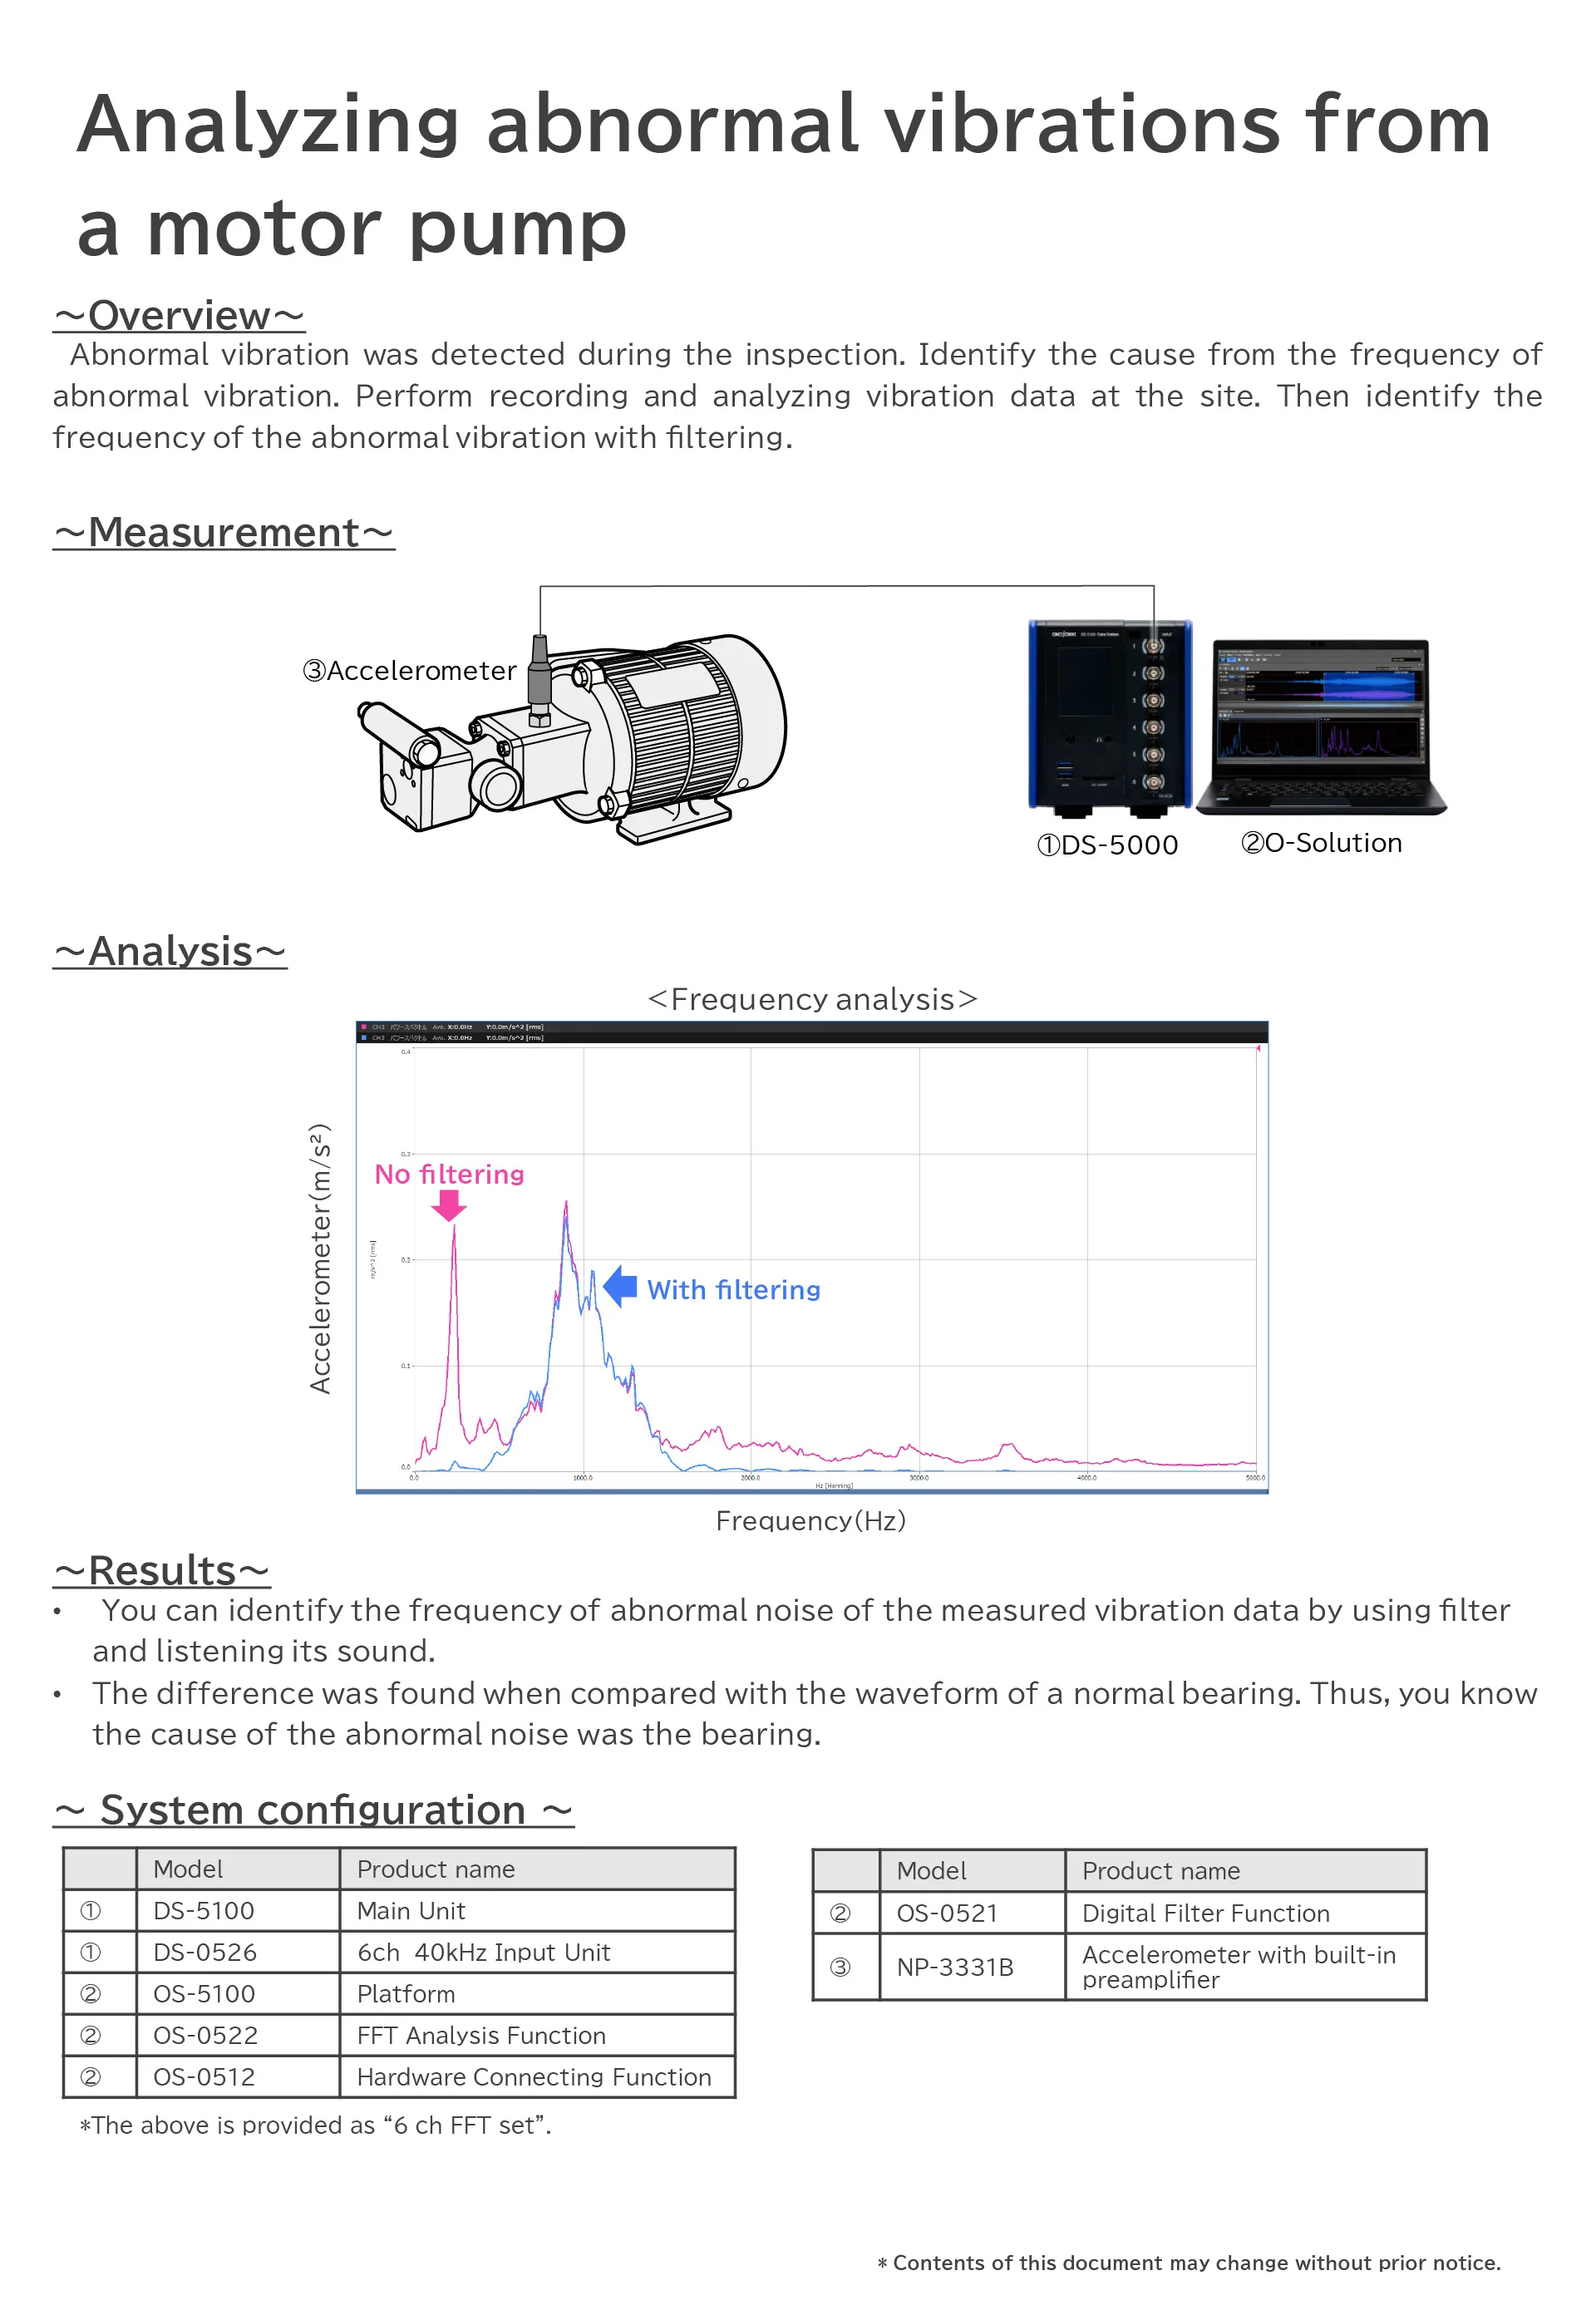 Analyzing abnormal vibrations from a motor pump